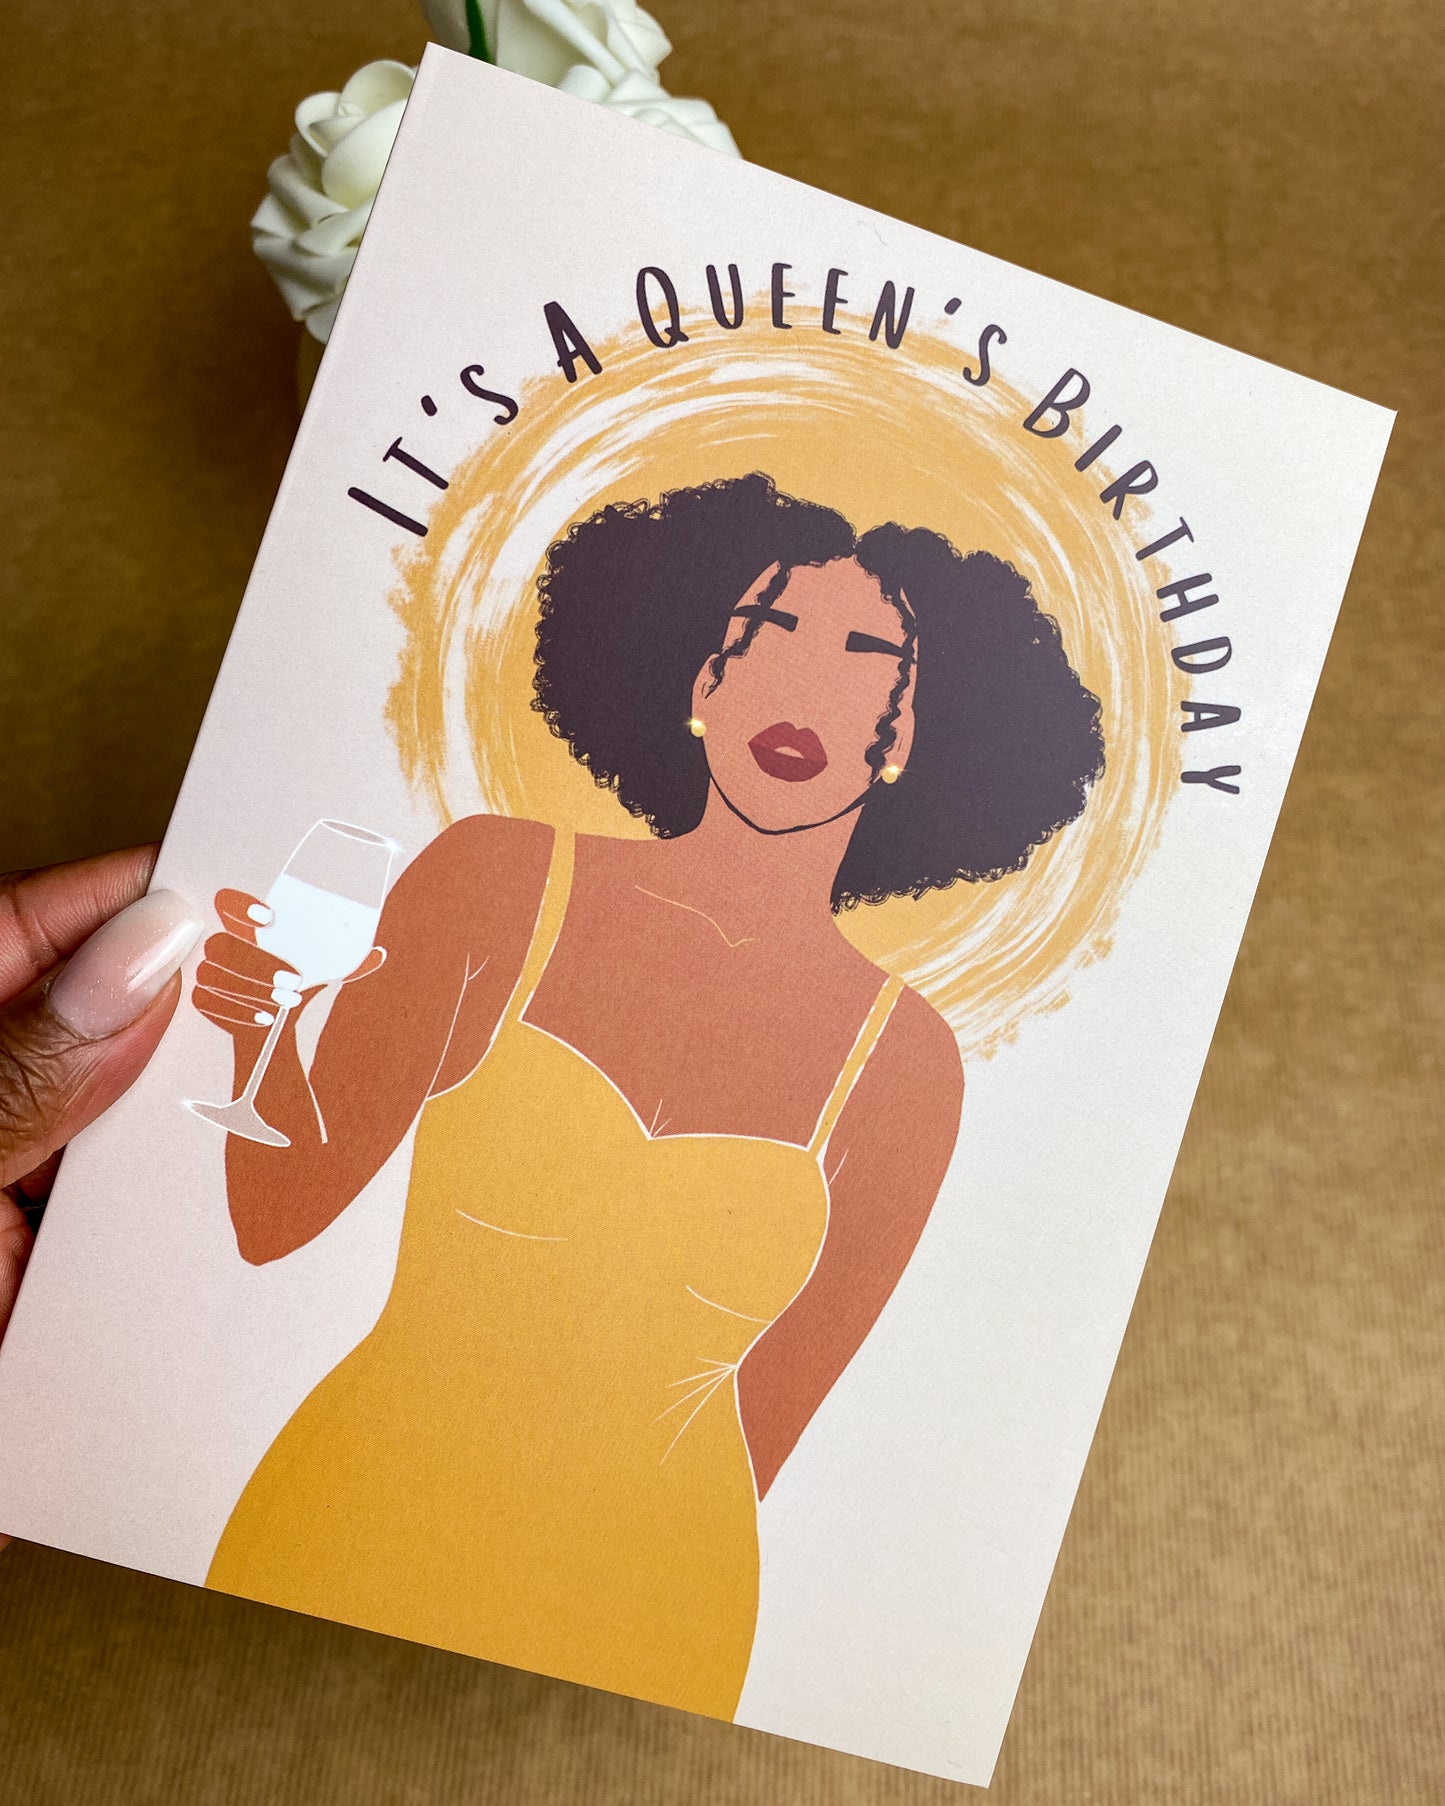 It's A Queens Birthday - Mixed Race / Black Woman Birthday Card